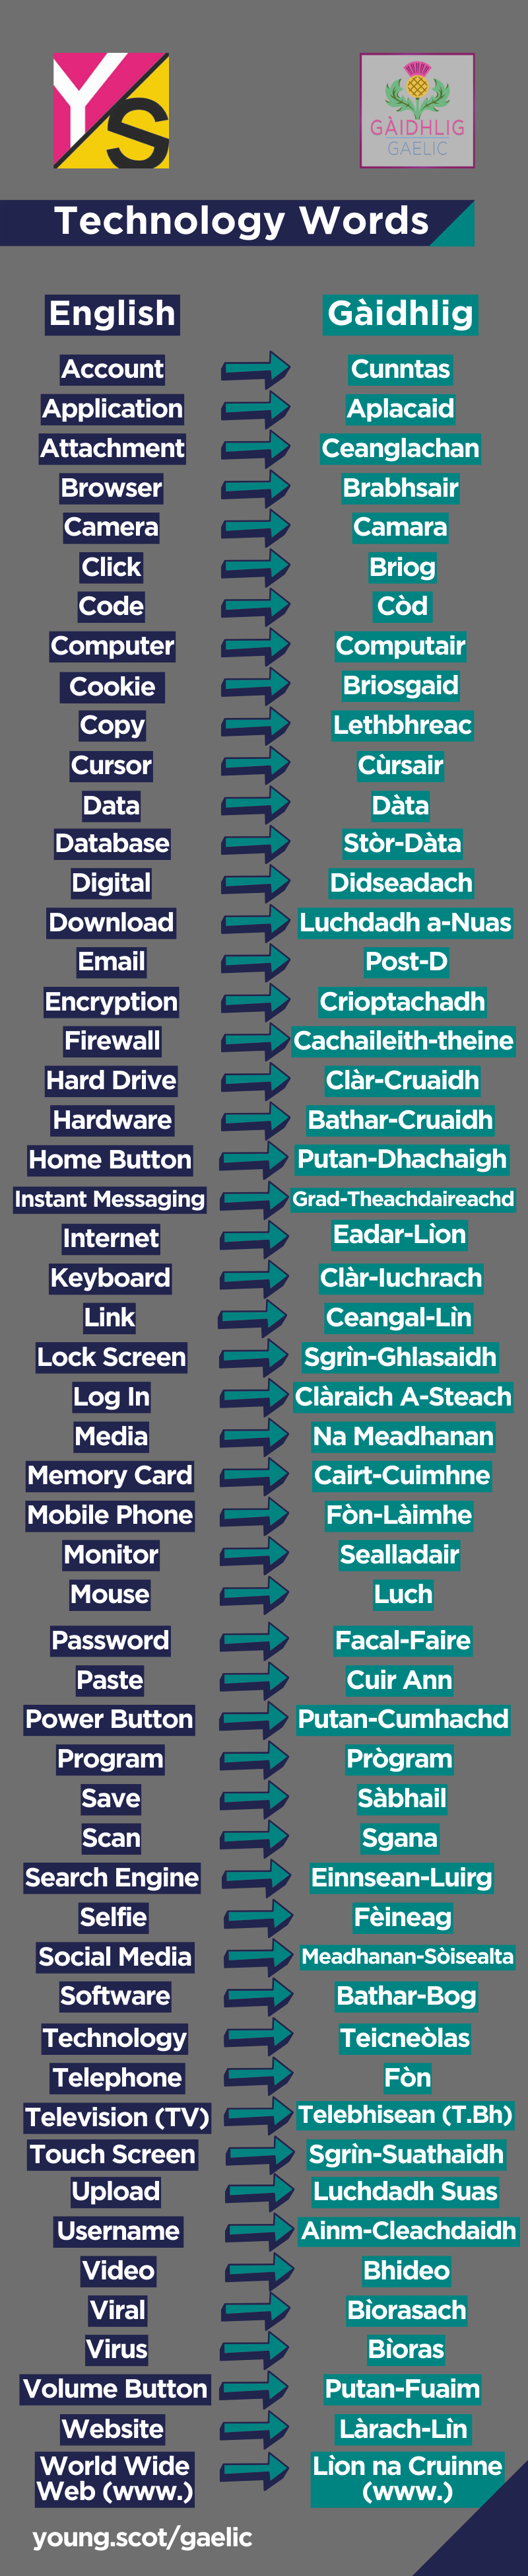 Infographic listing English technology words alphabetically in a vertical list on the left, with their Gaelic translations opposite them on the right hand side. Text list below;